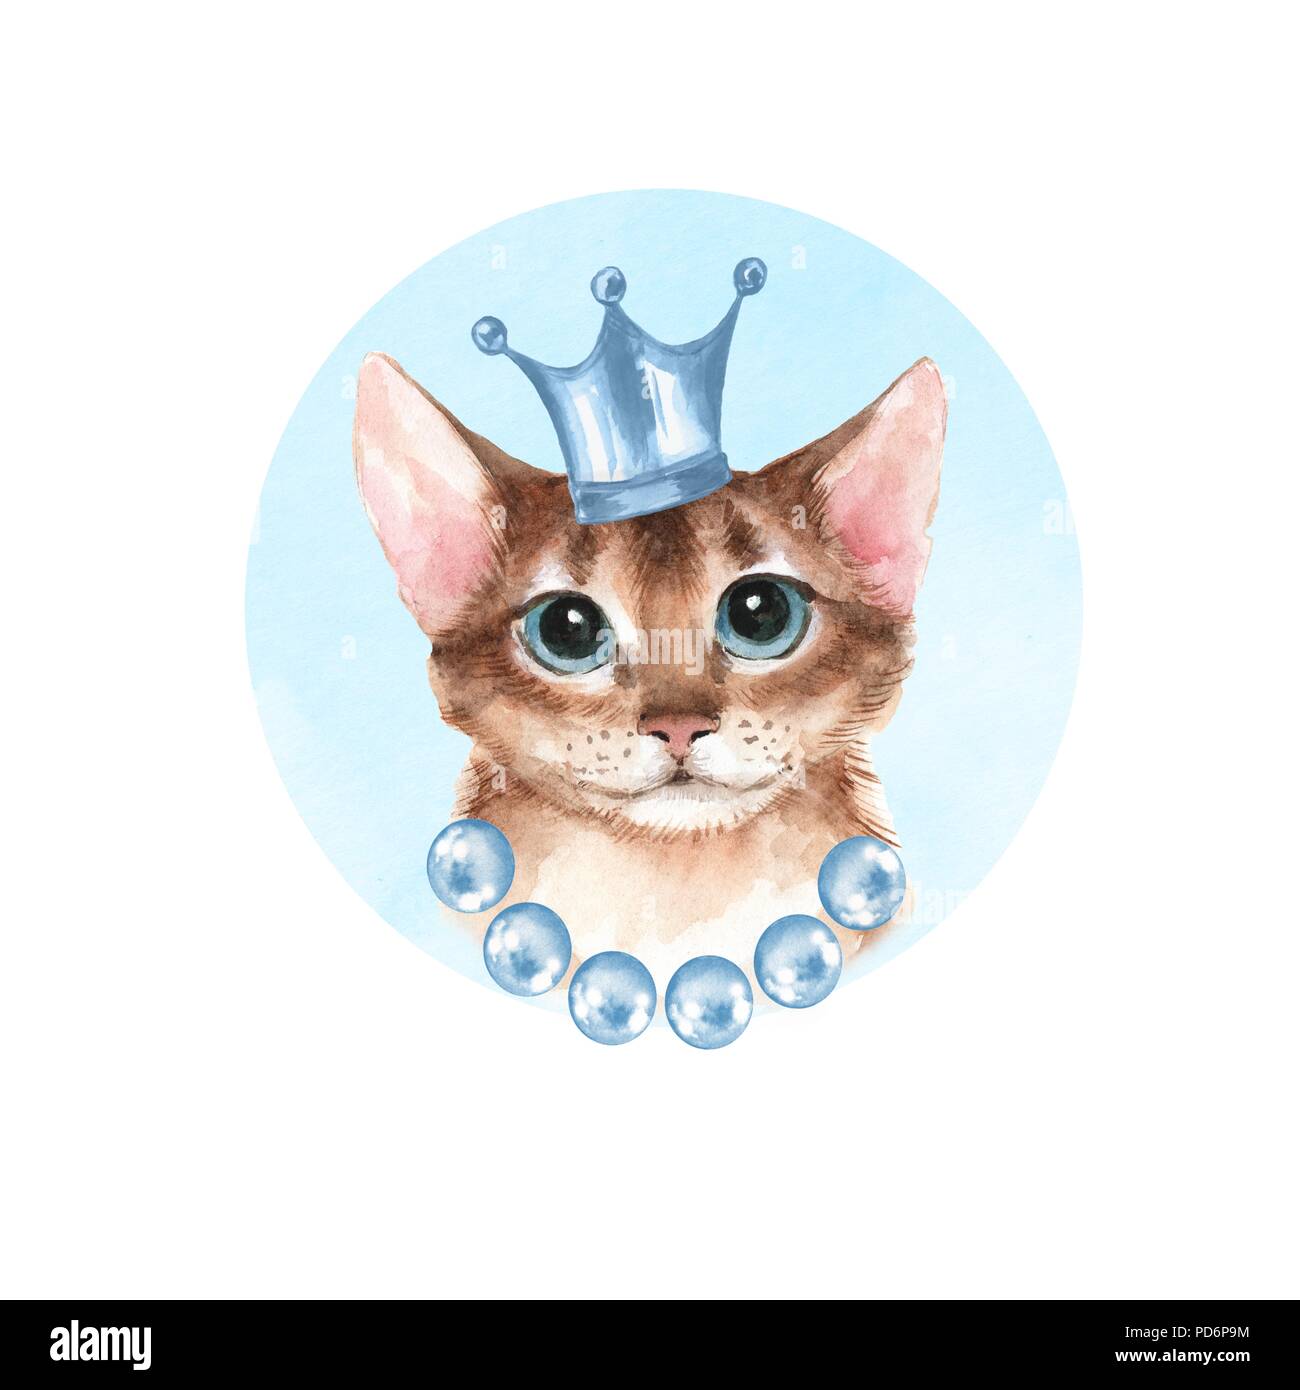 Cat in crown. Watercolor illustration Stock Photo